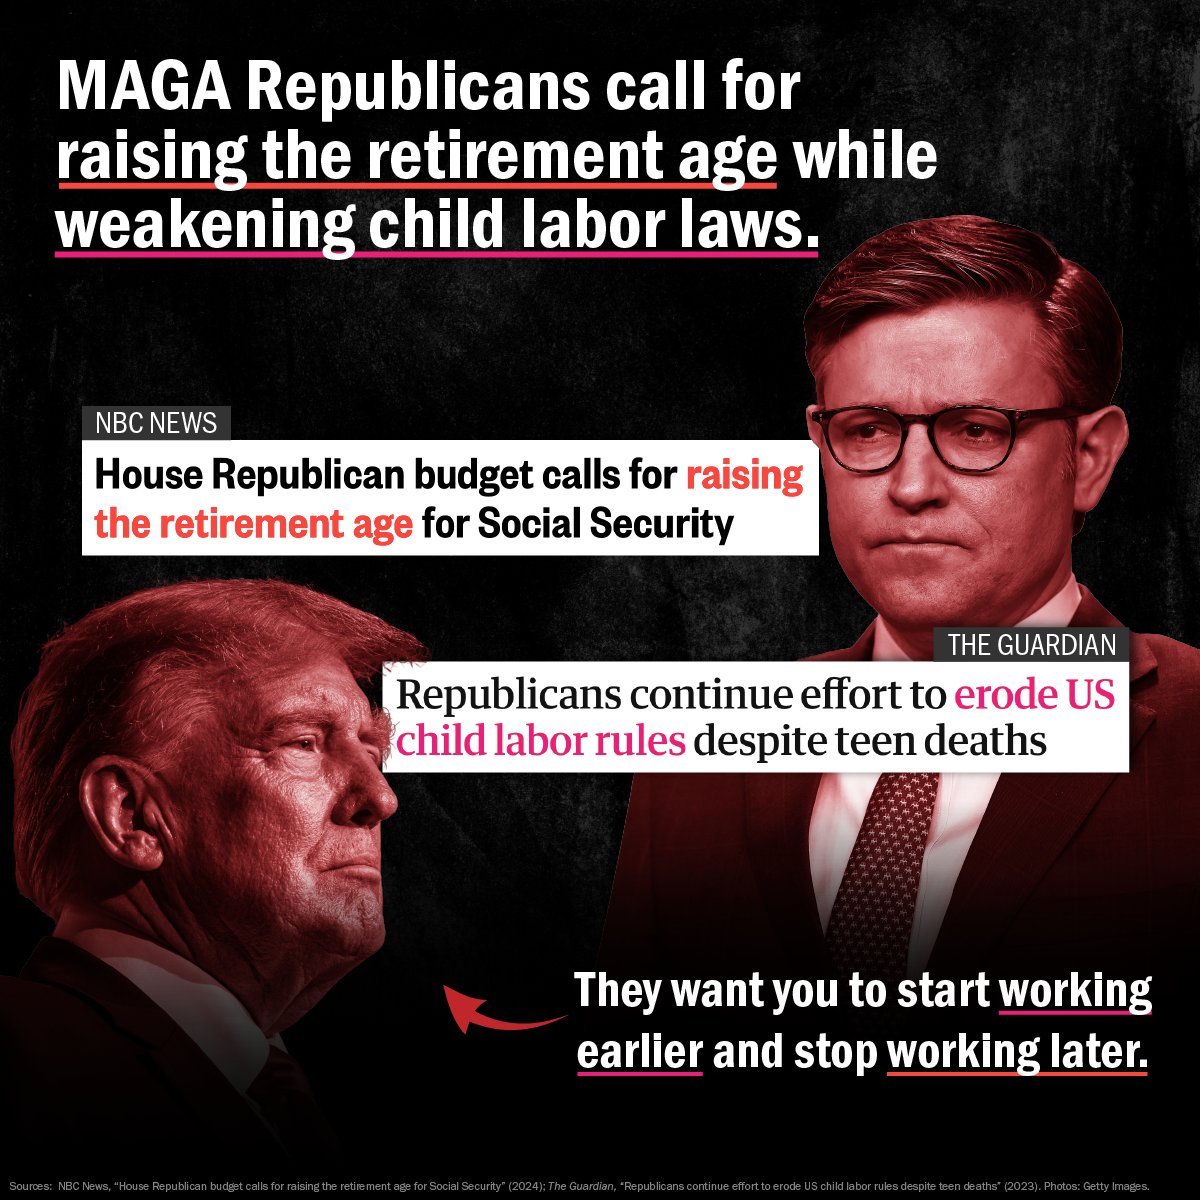 Why do MAGA Republicans want you to start working earlier and stop working later?